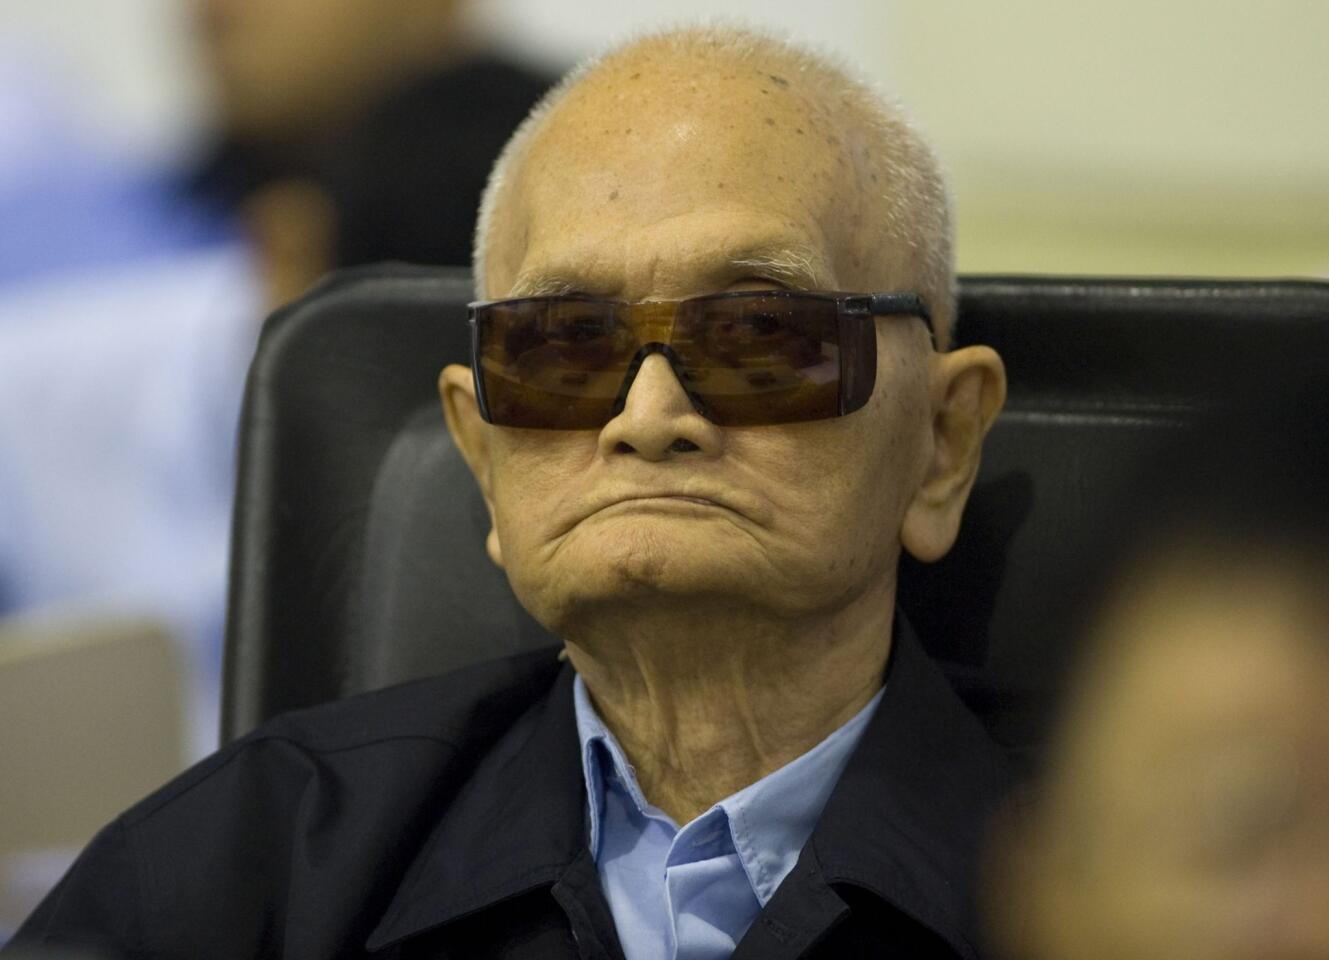 Nuon Chea, former Khmer Rouge deputy secretary of the communist party of Kampuchea, in the Phnom Penh courtroom.